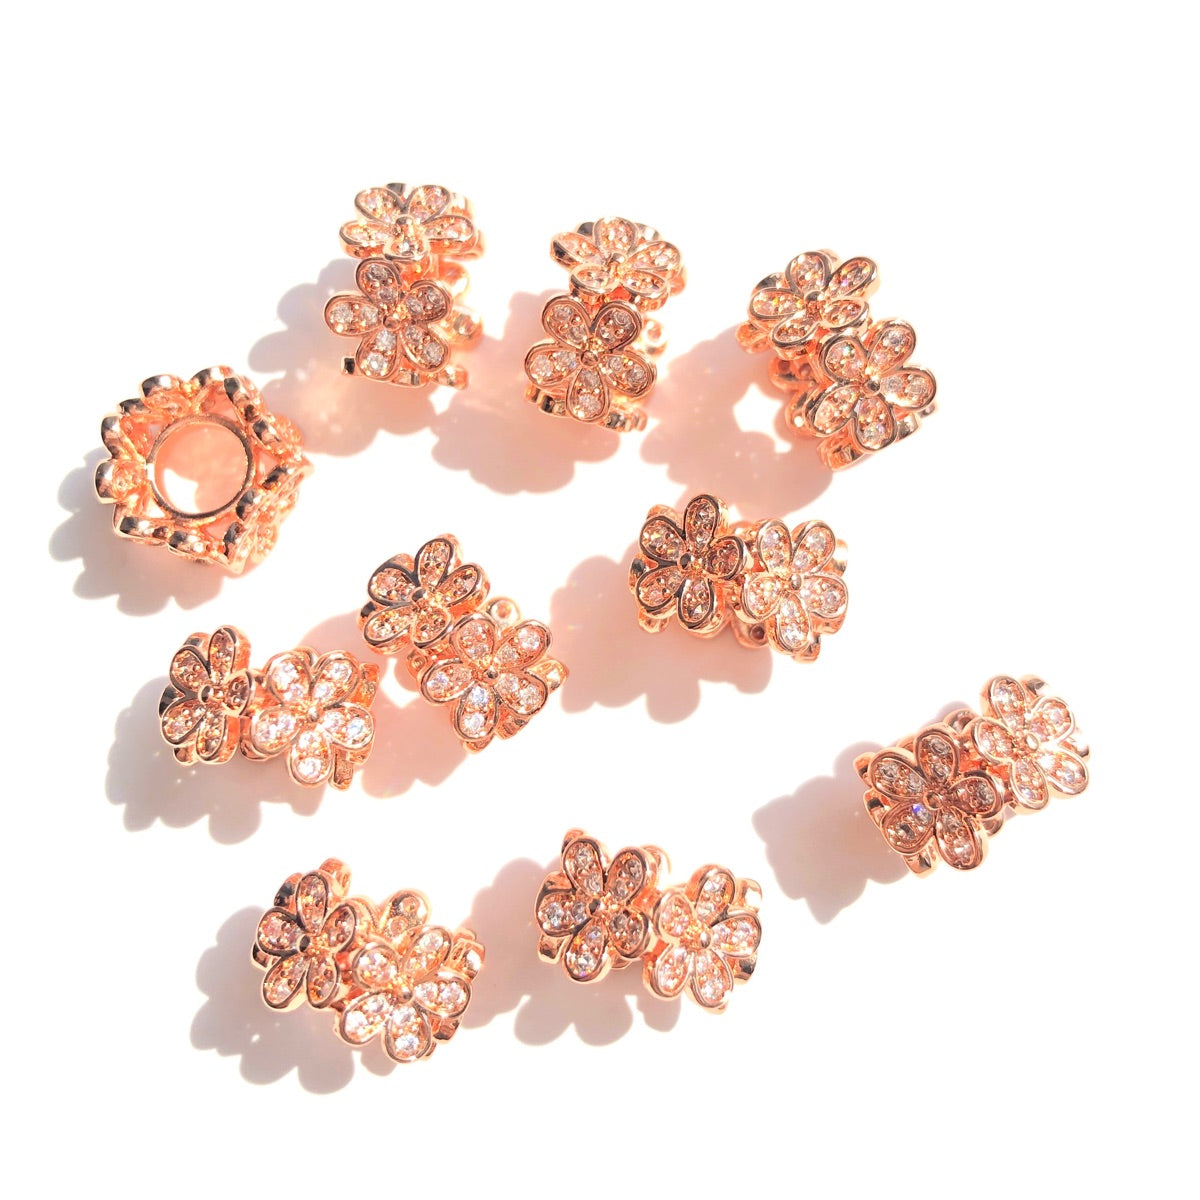 10-20-50pcs/lot 10.6*6.8mm CZ Paved Flower Spacers Clear on Rose Gold CZ Paved Spacers New Spacers Arrivals Wholesale Charms Beads Beyond